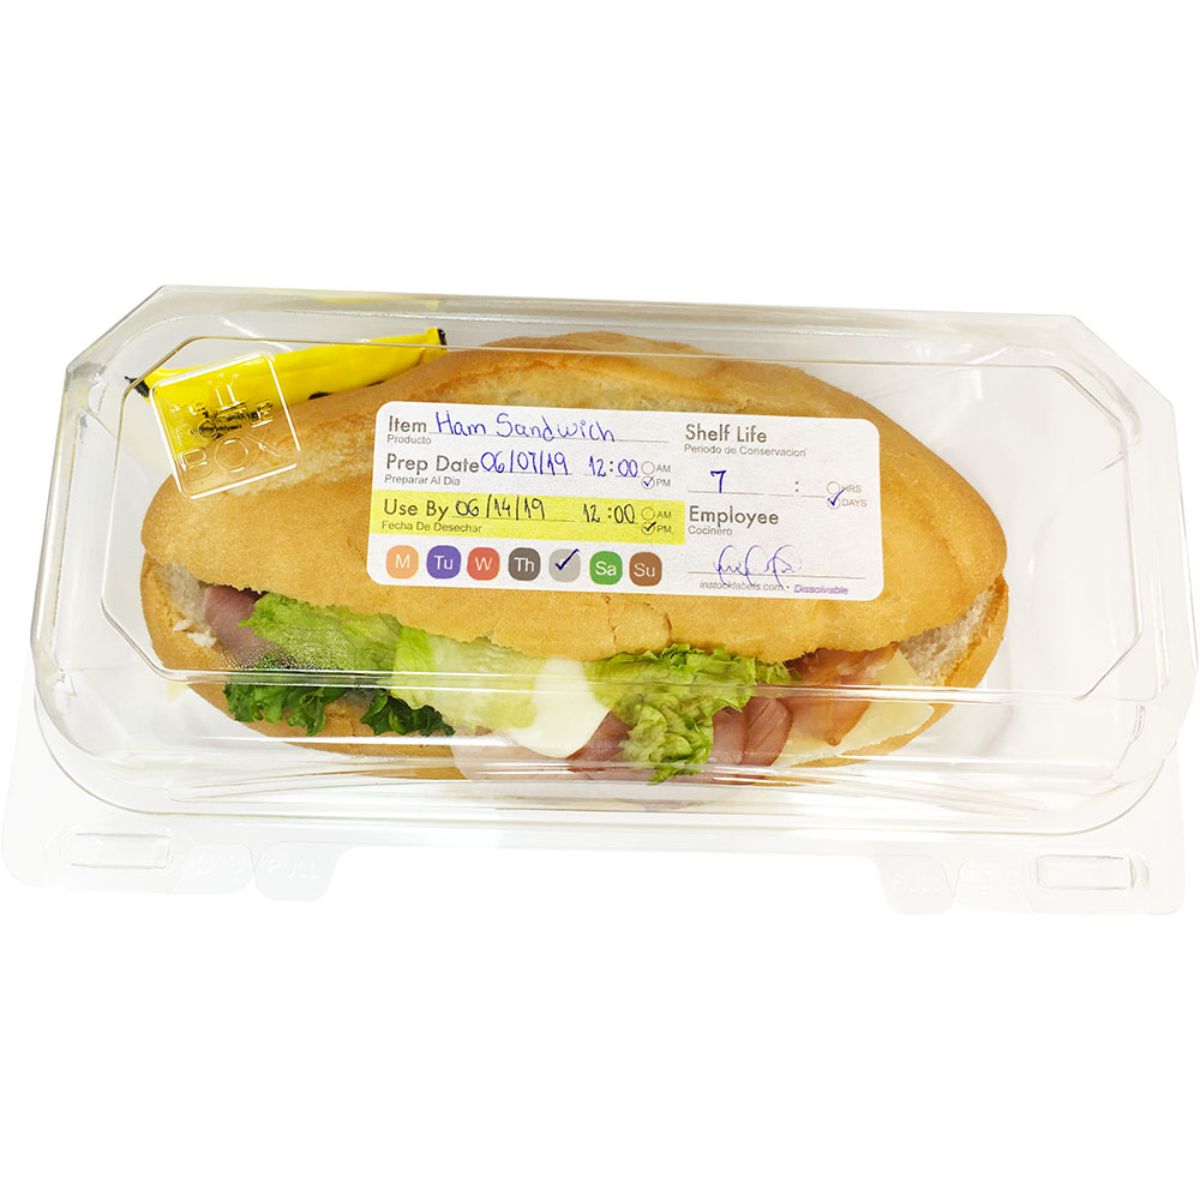 Ham and Cheese Sandwich Plastic Container with Label with Price on